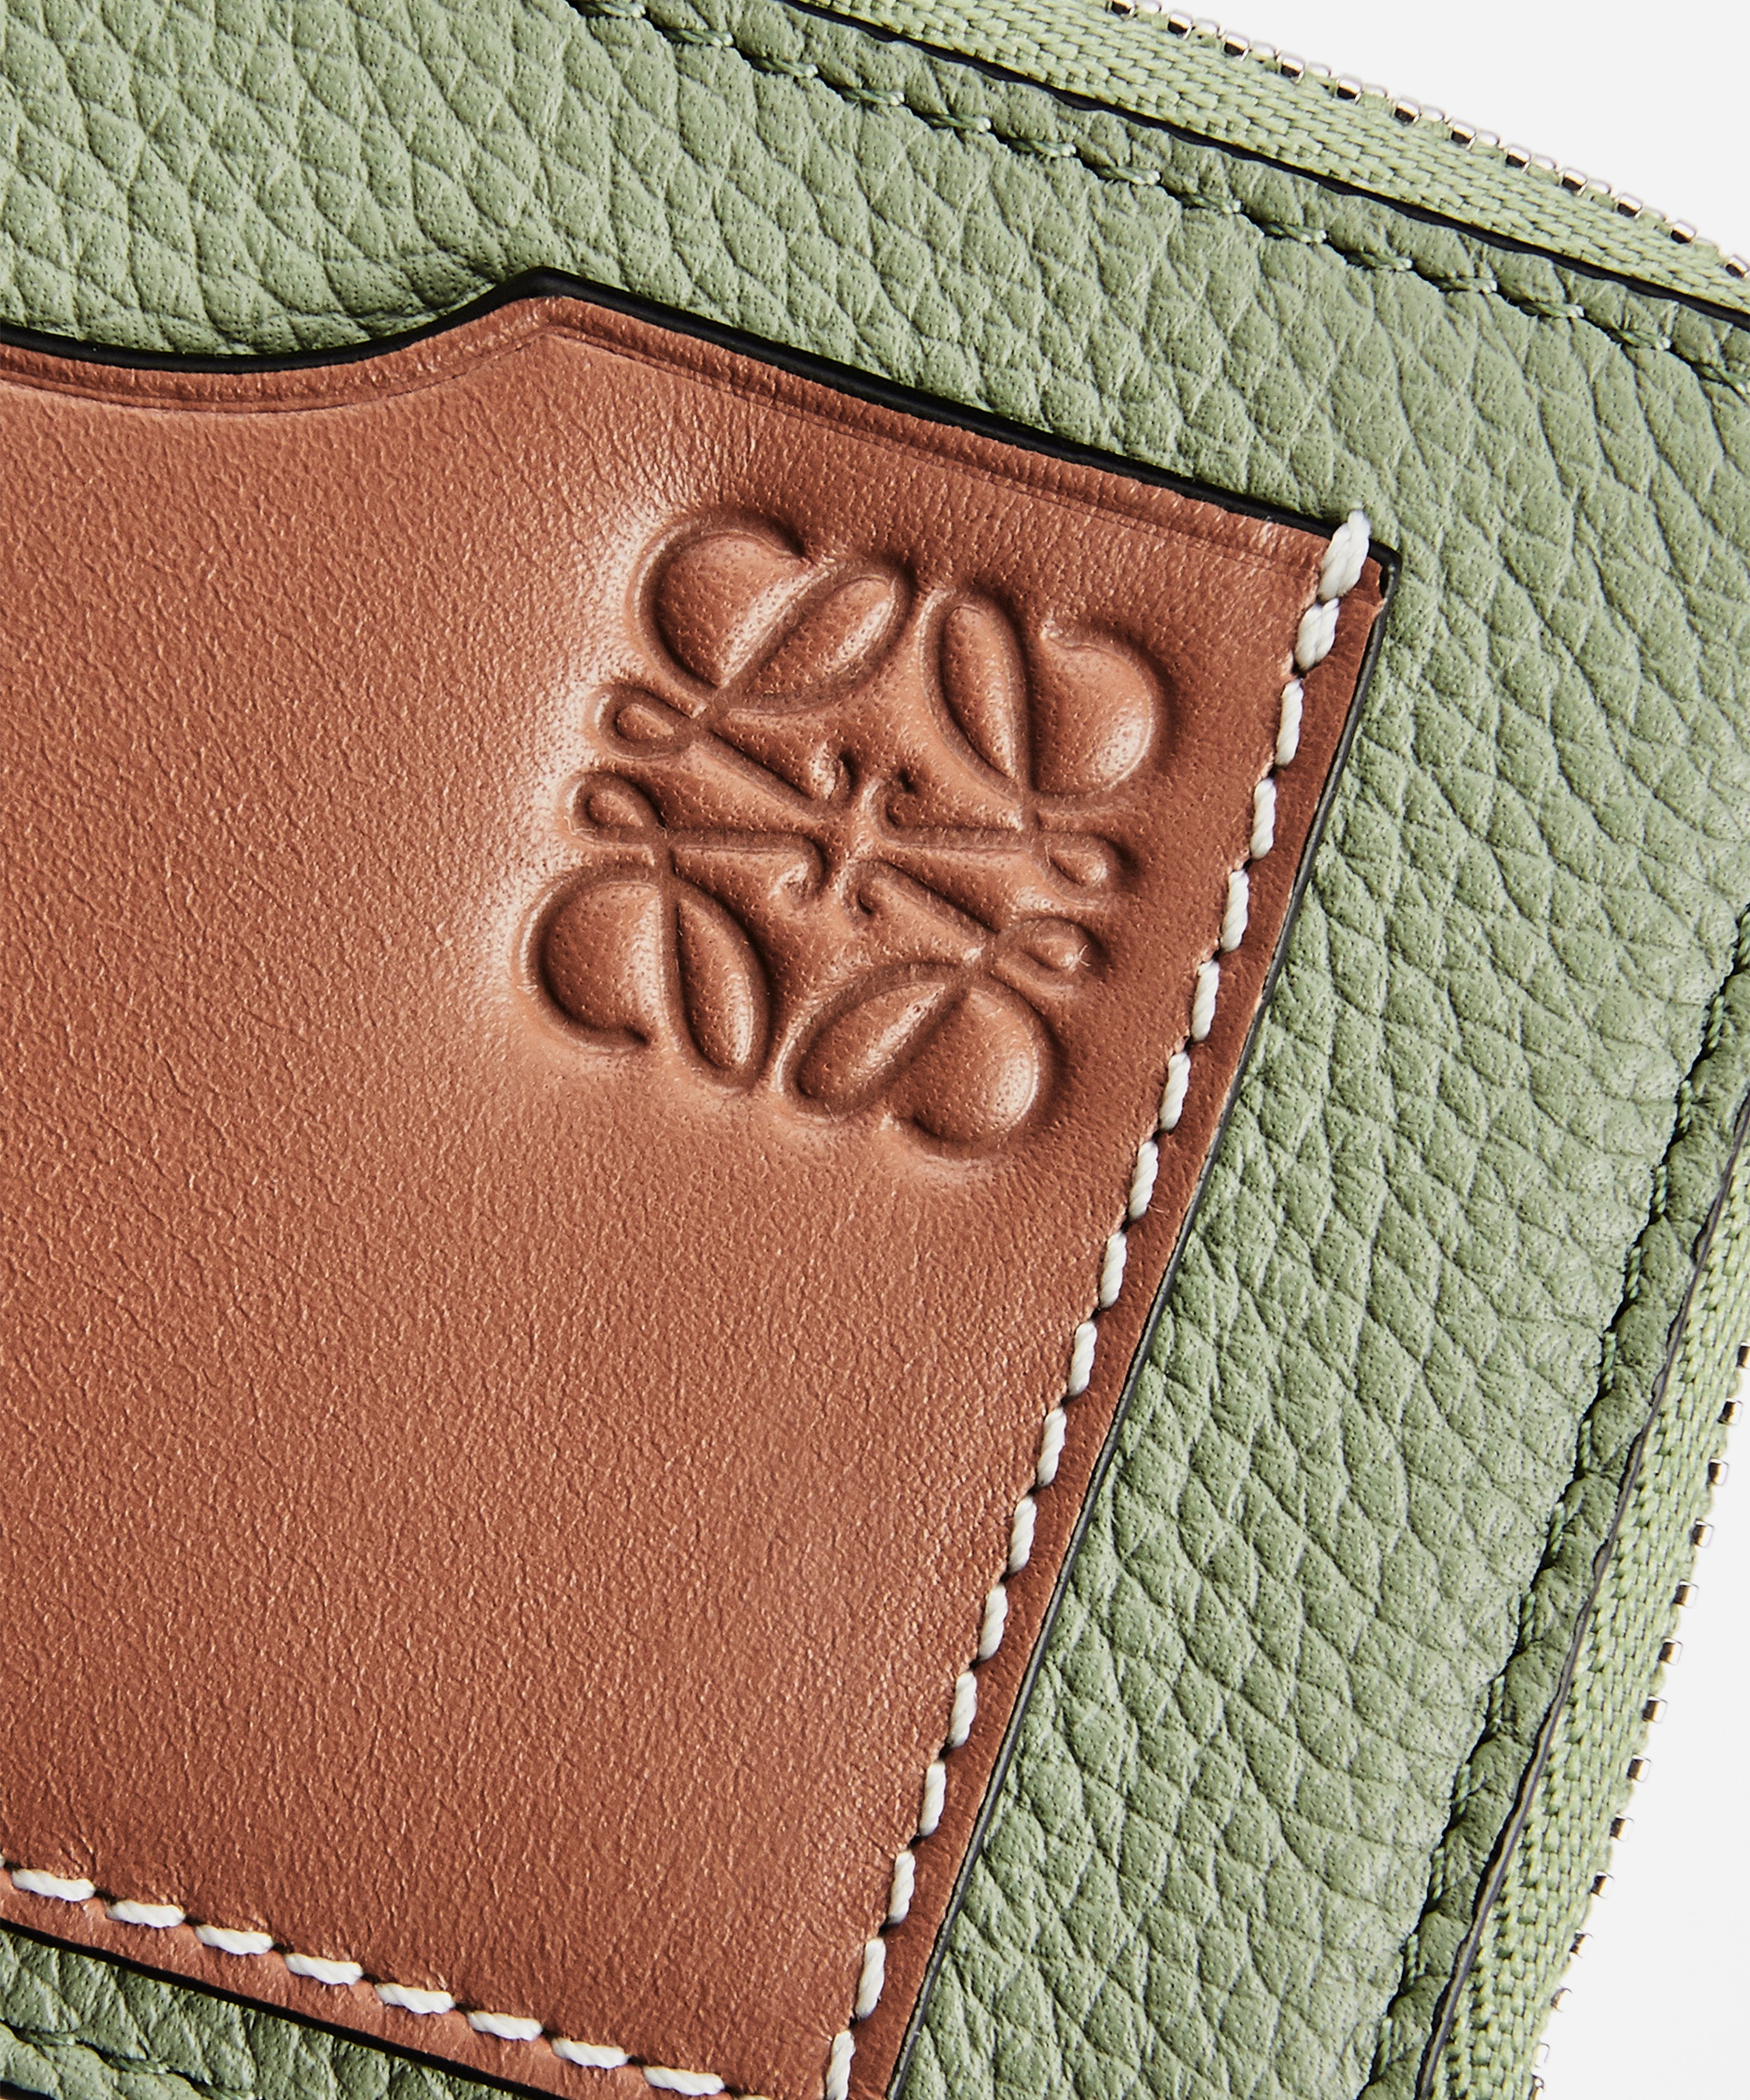 Loewe Leather Coin Cardholder